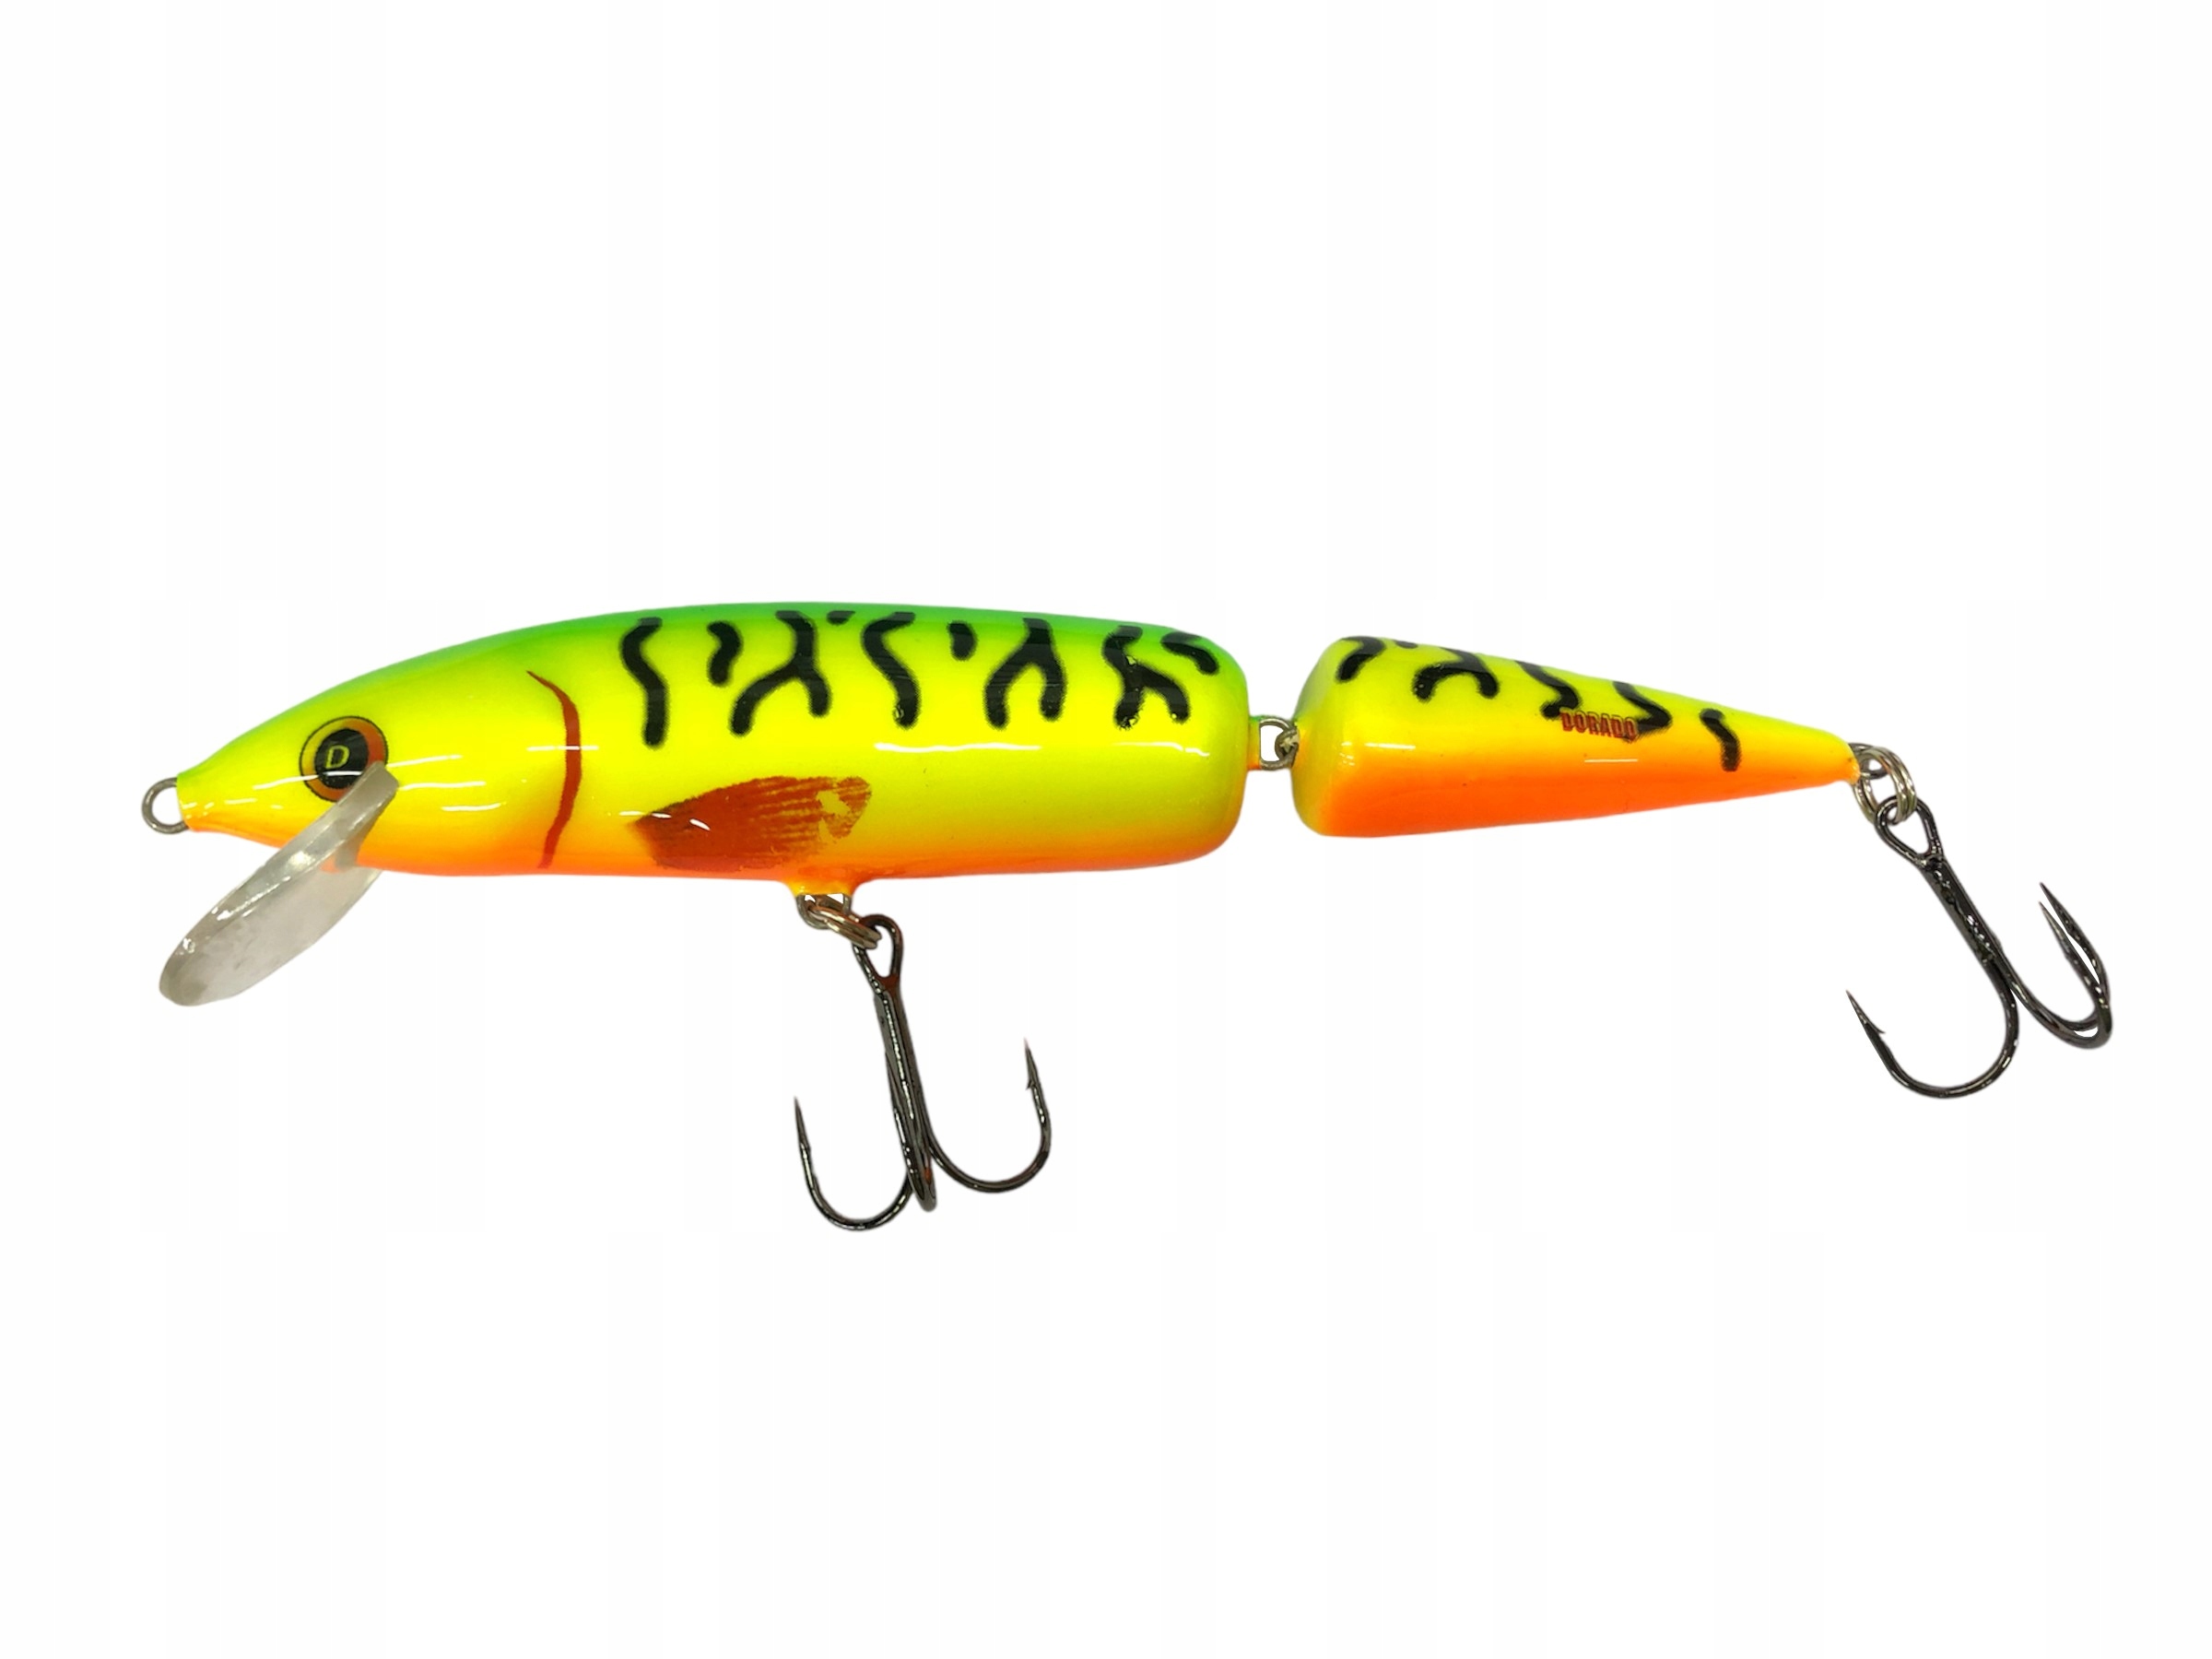 Dorado Classic Jointed Floating 16cm 34g FT - CLASSIC JOINTED FT -  14561796579 